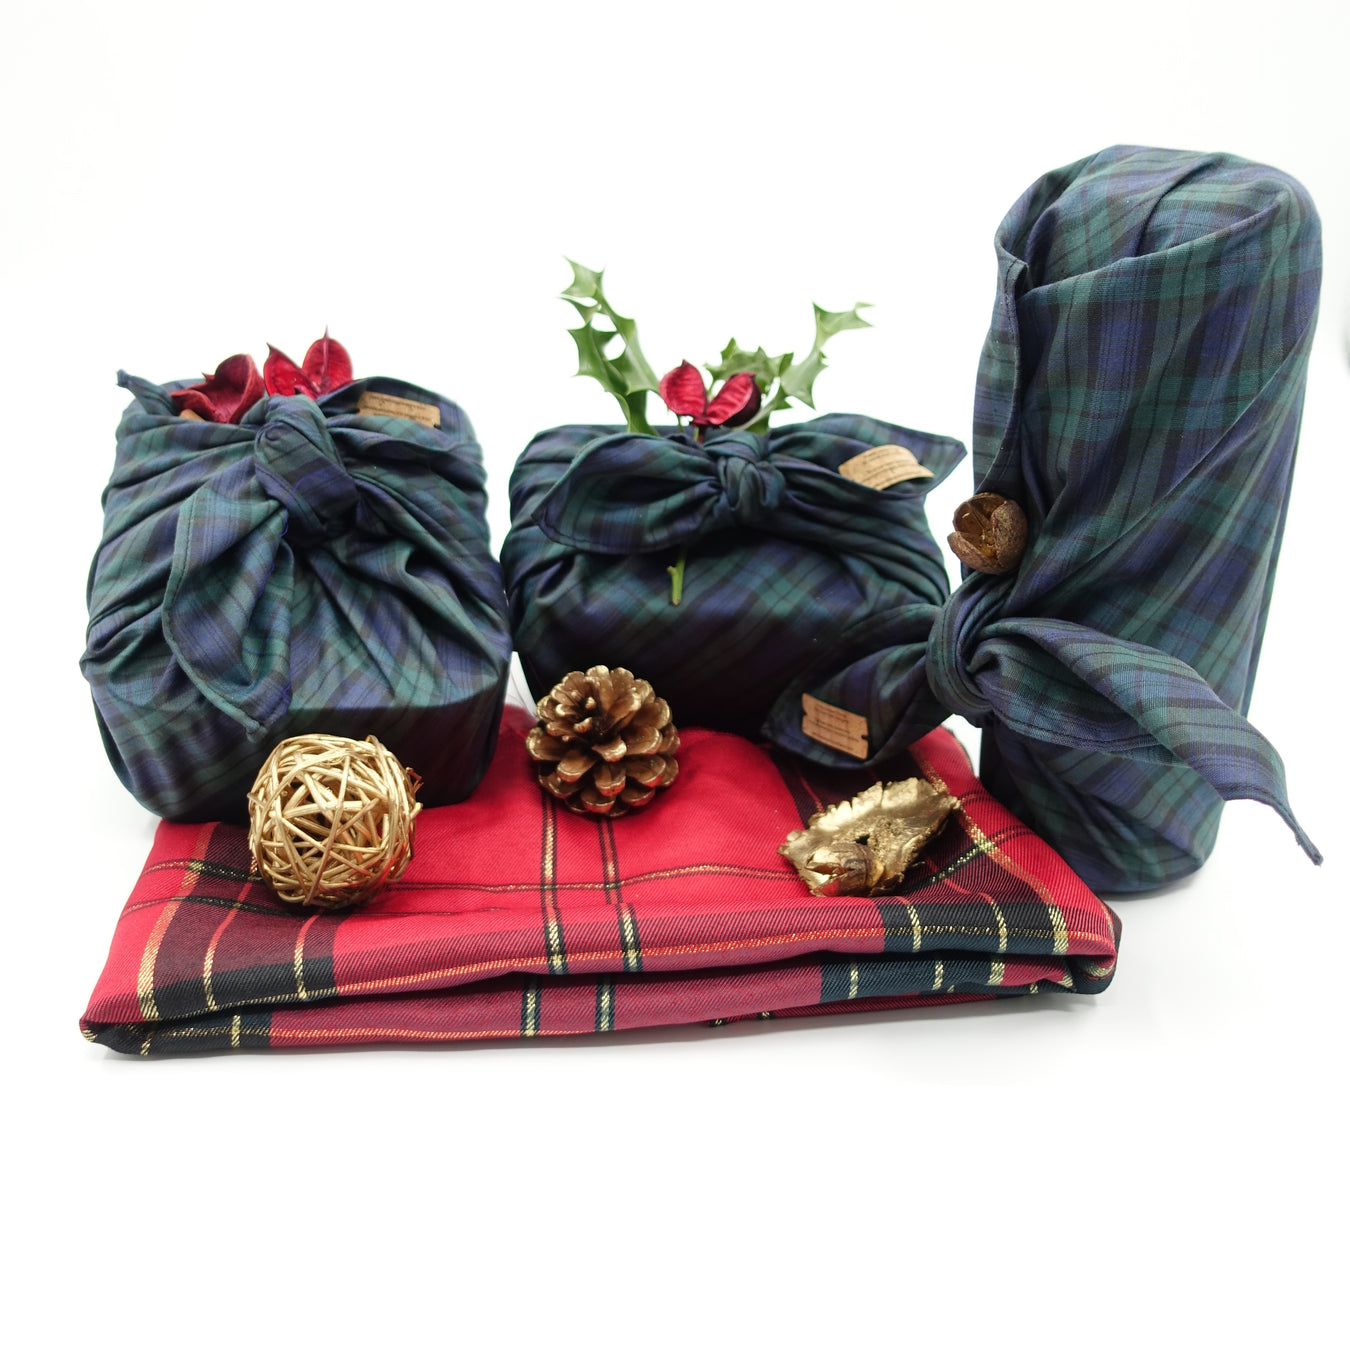 View all Gift Wrapping